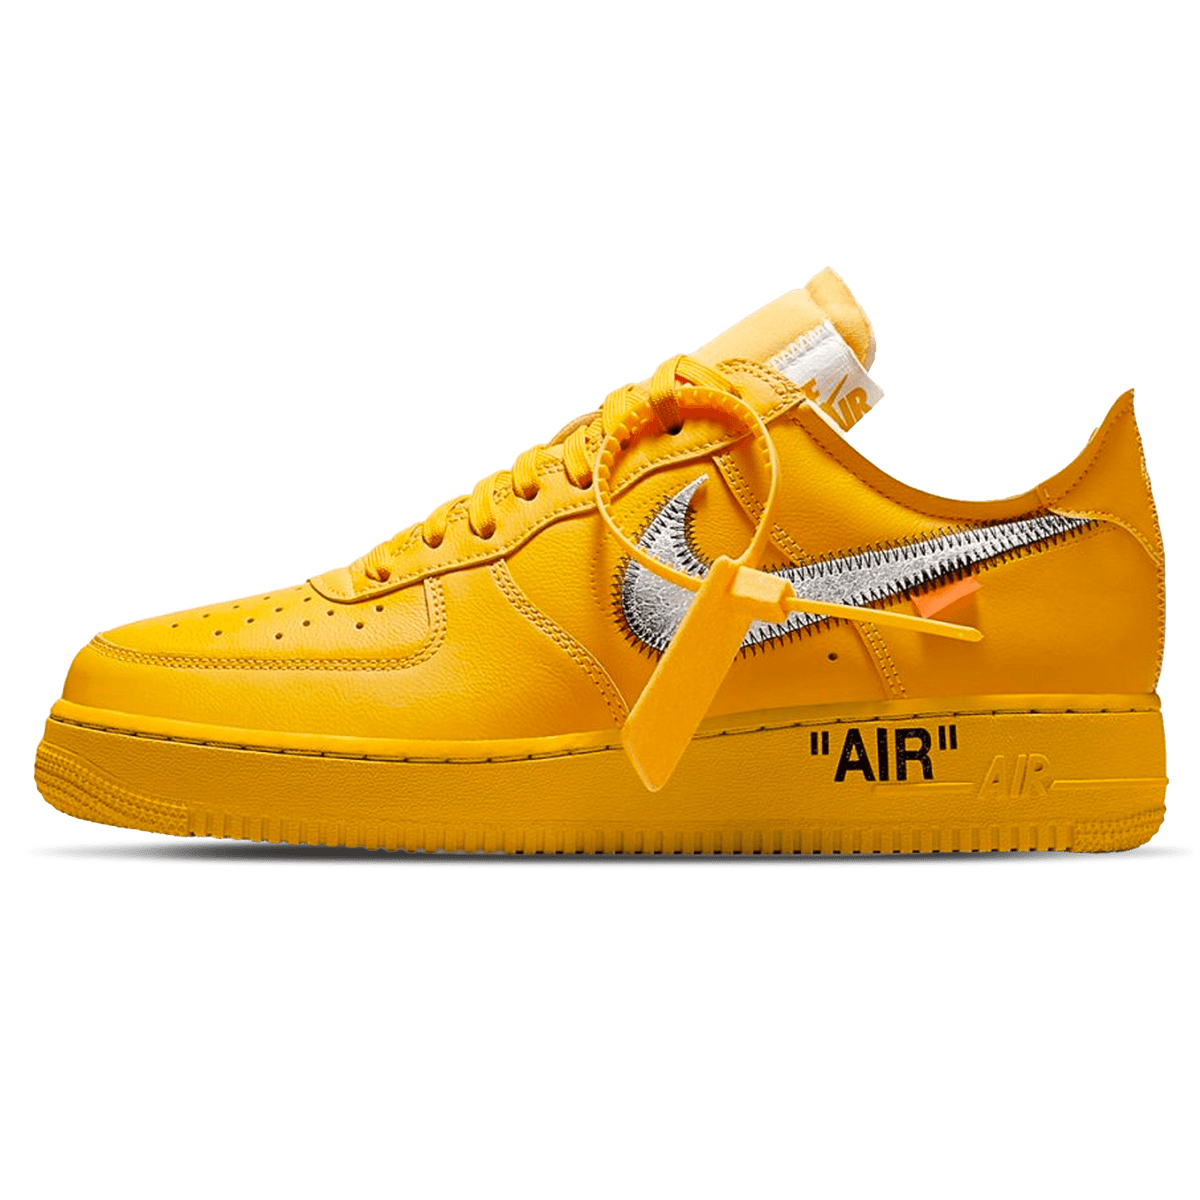 nike air force 1 low off white university gold metallic silver DD1876 700 1